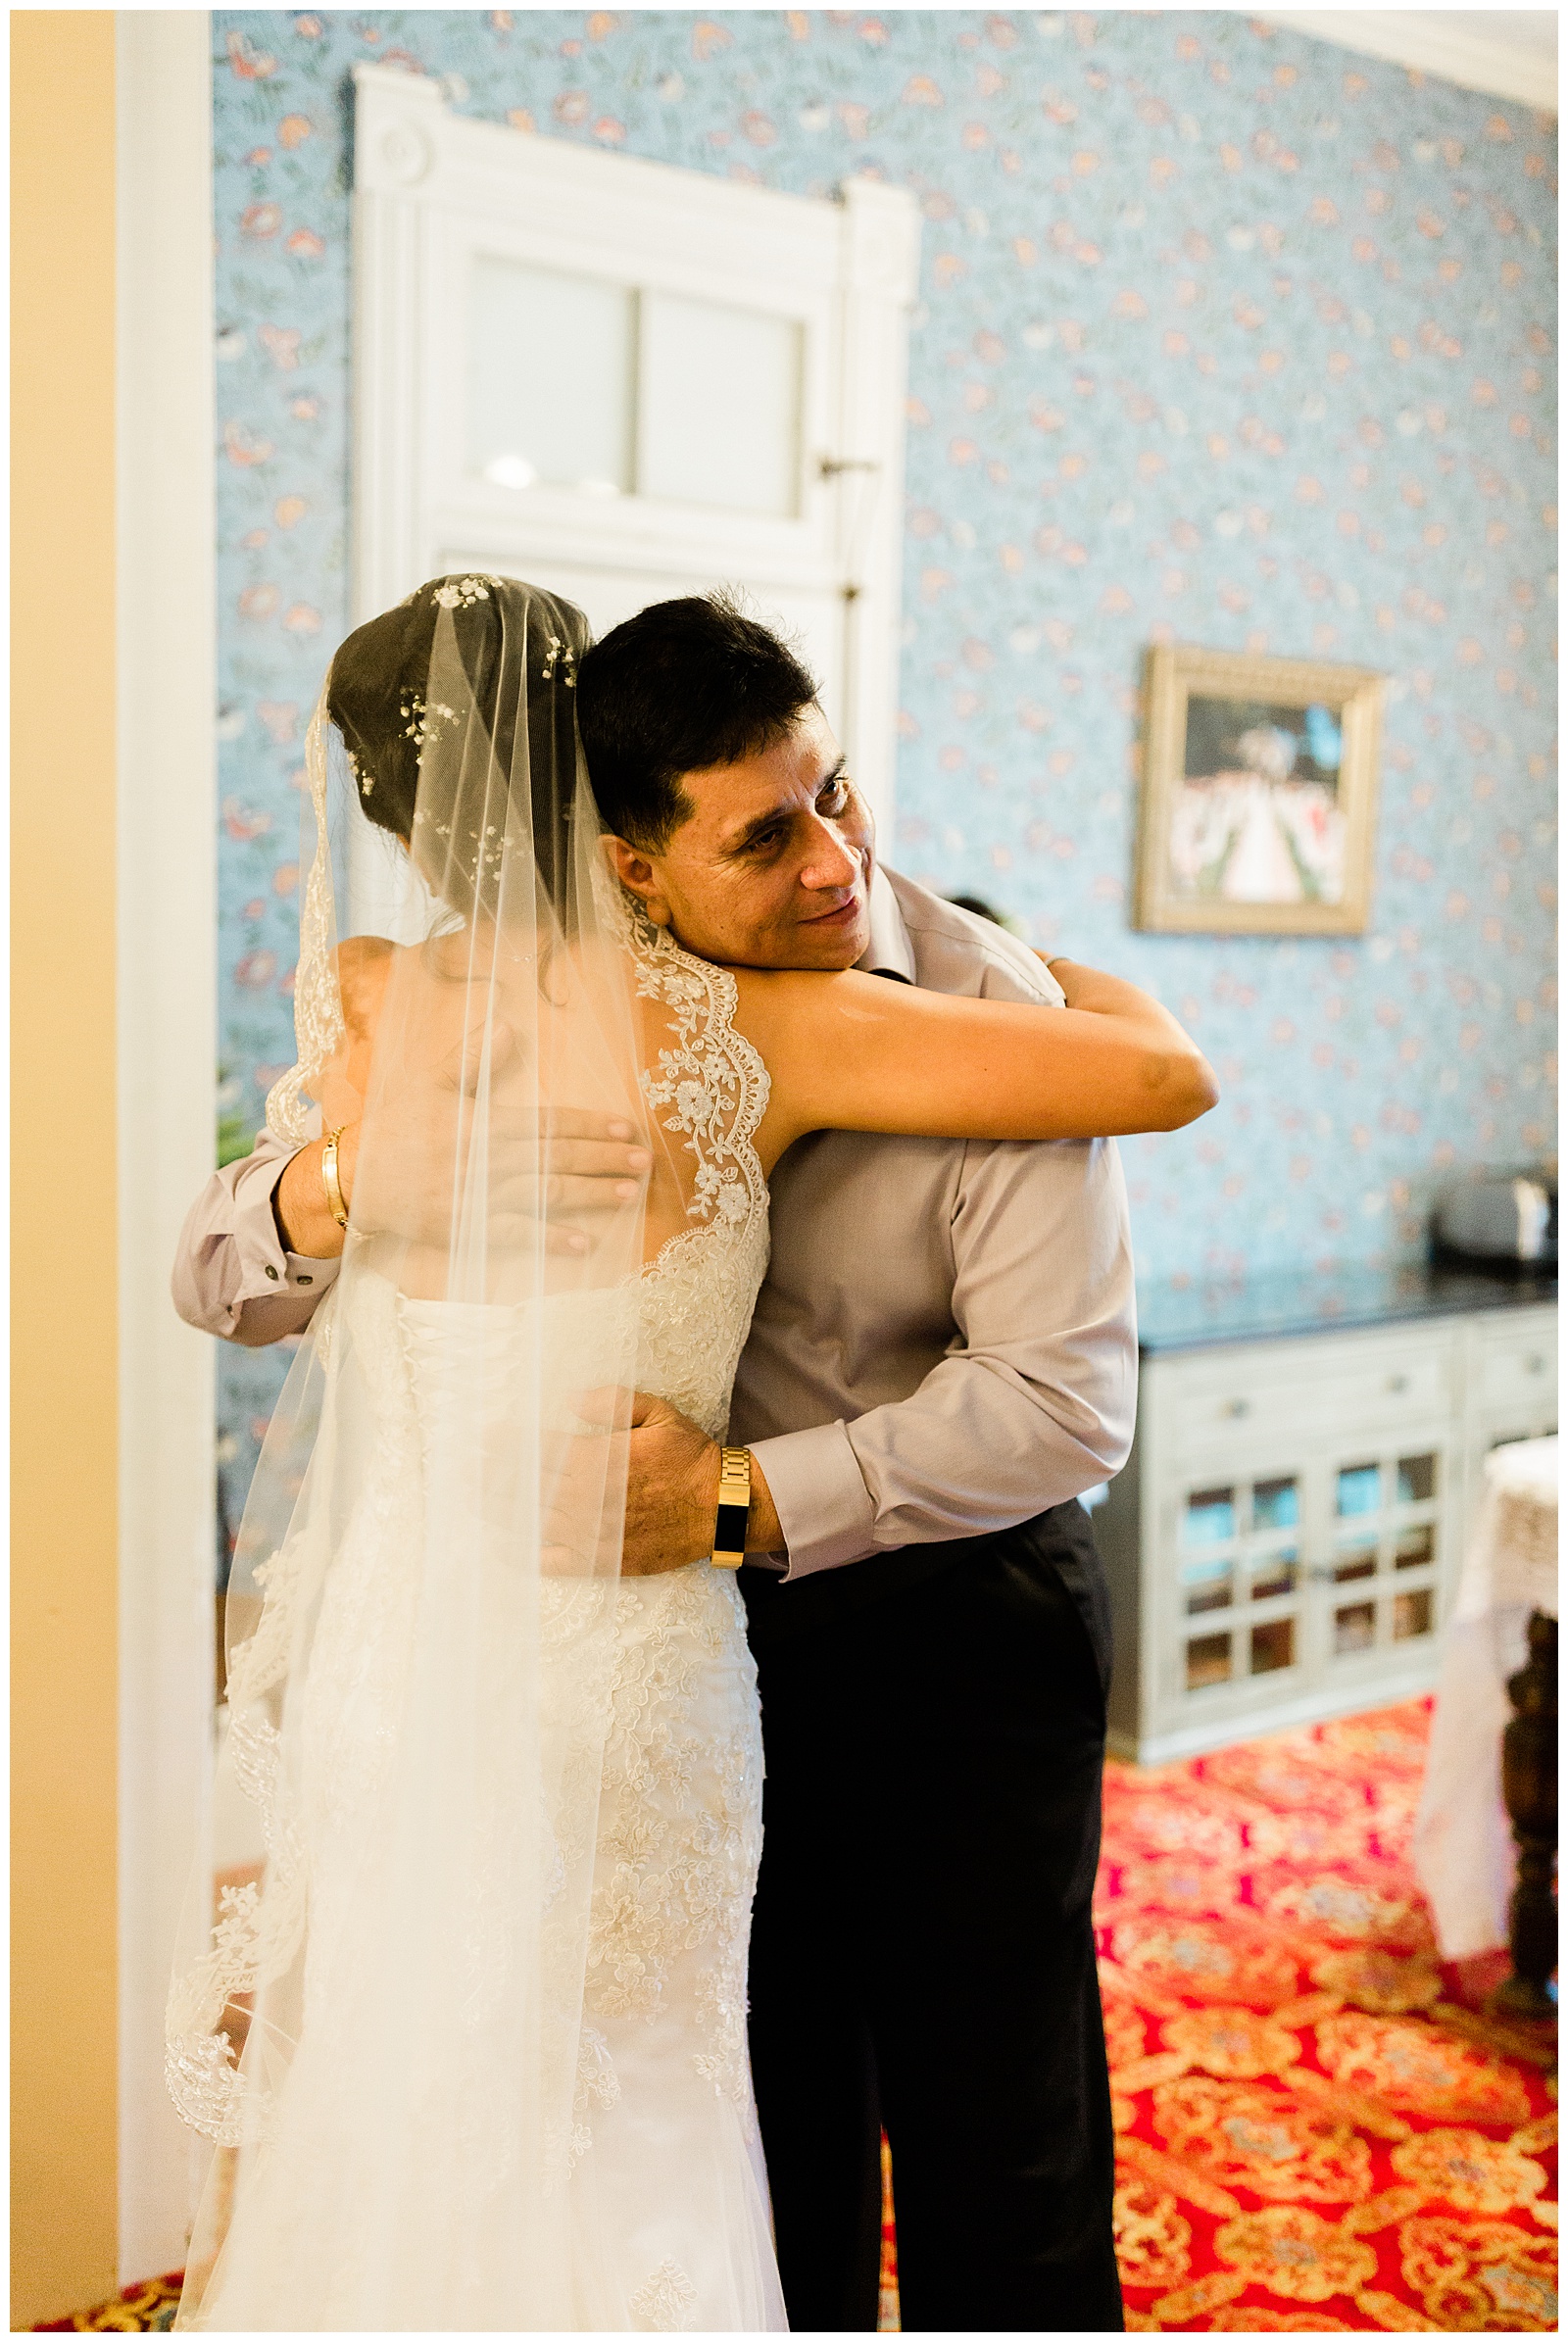 father of the bride hugging her after seeing her for the first time